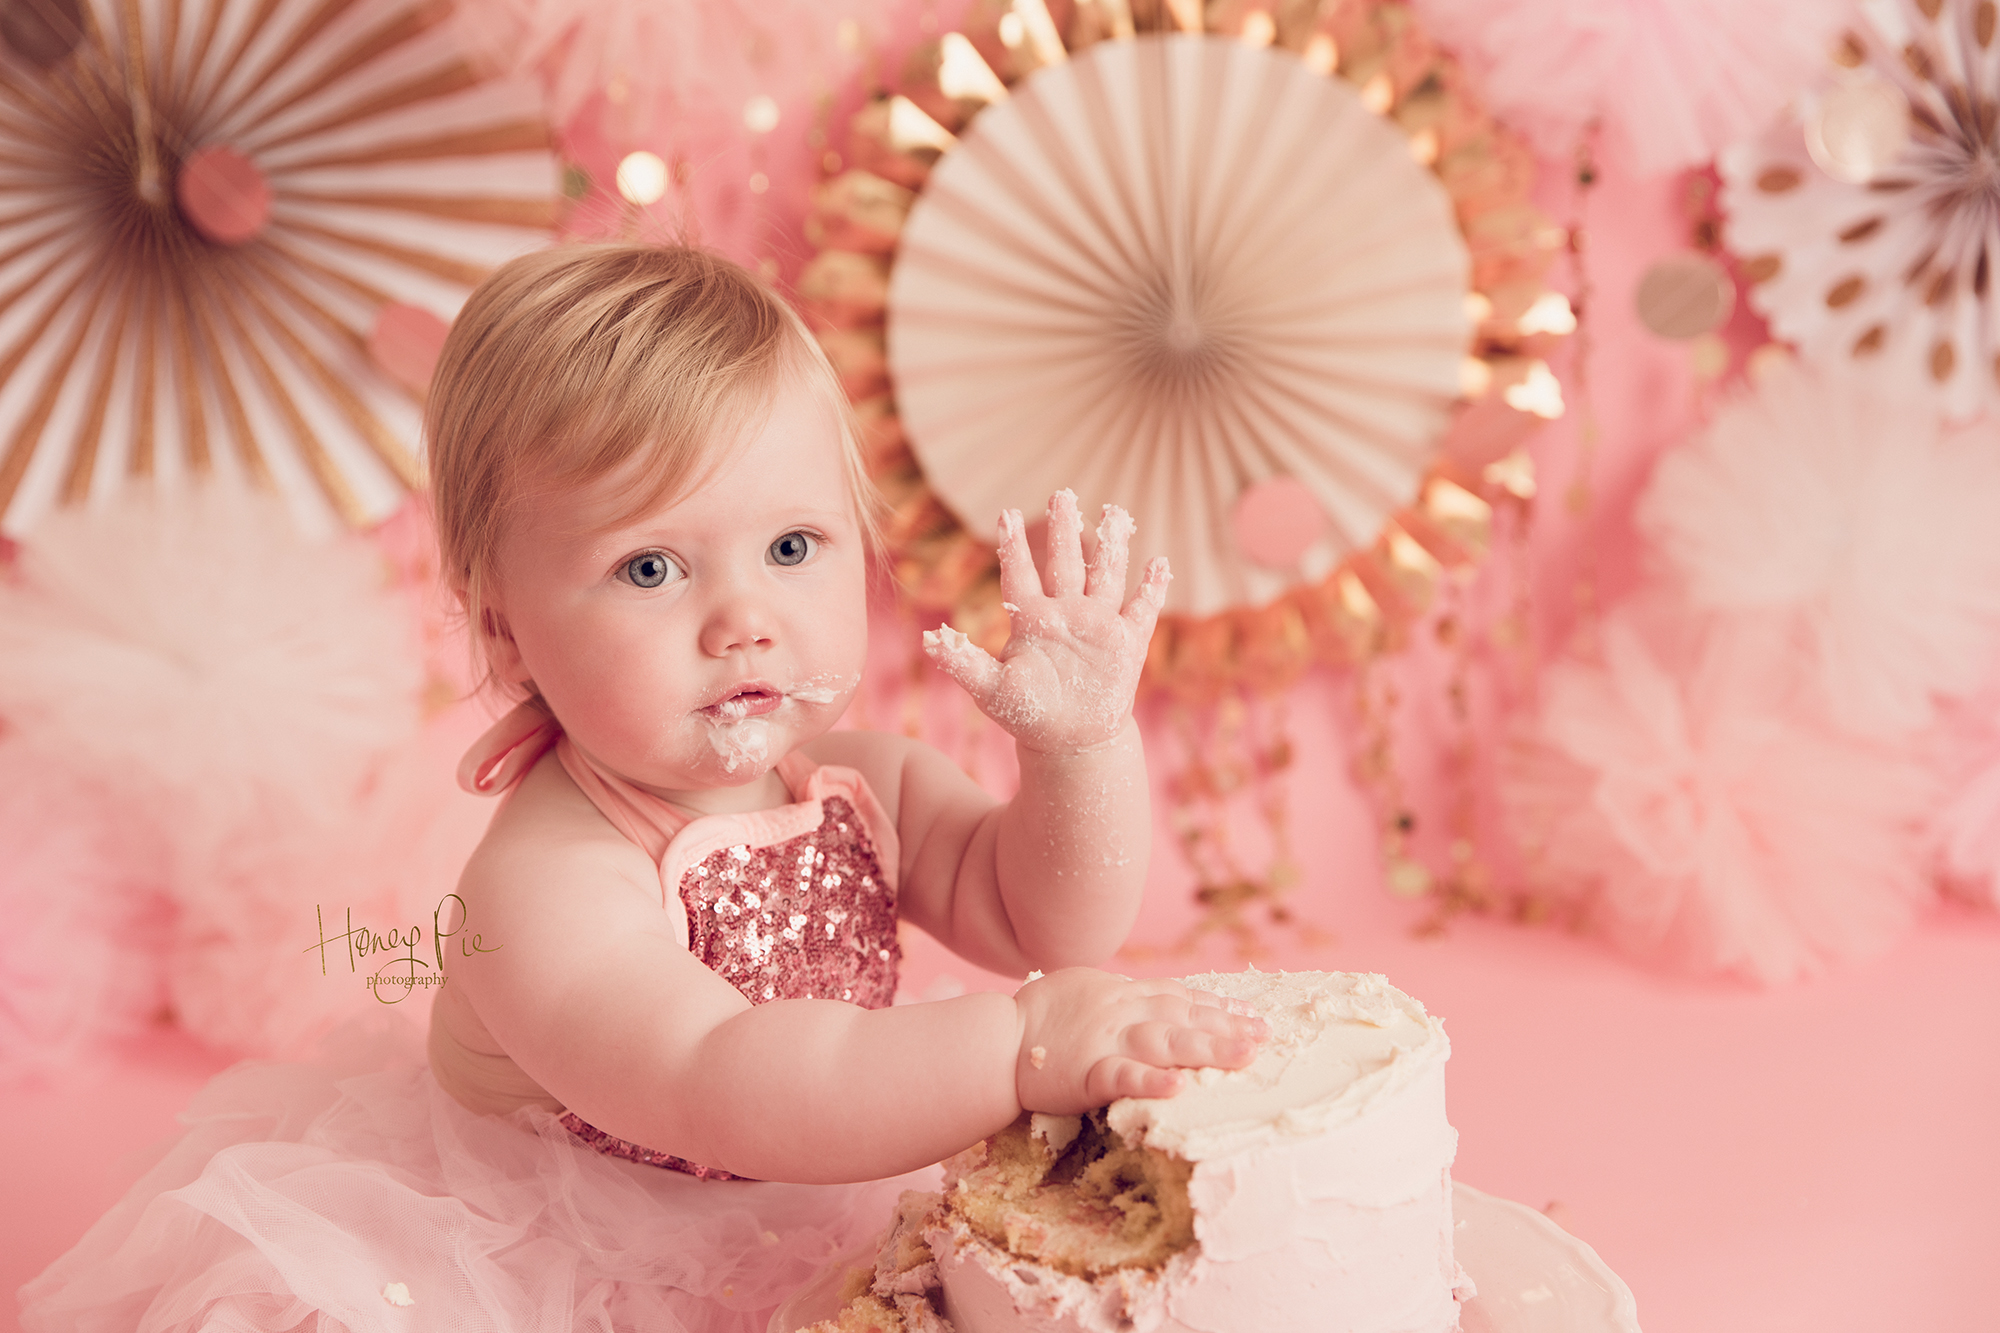 Baby girl waving to camera with cake all around her mouth & hands during her cake smash photography session in Worthing